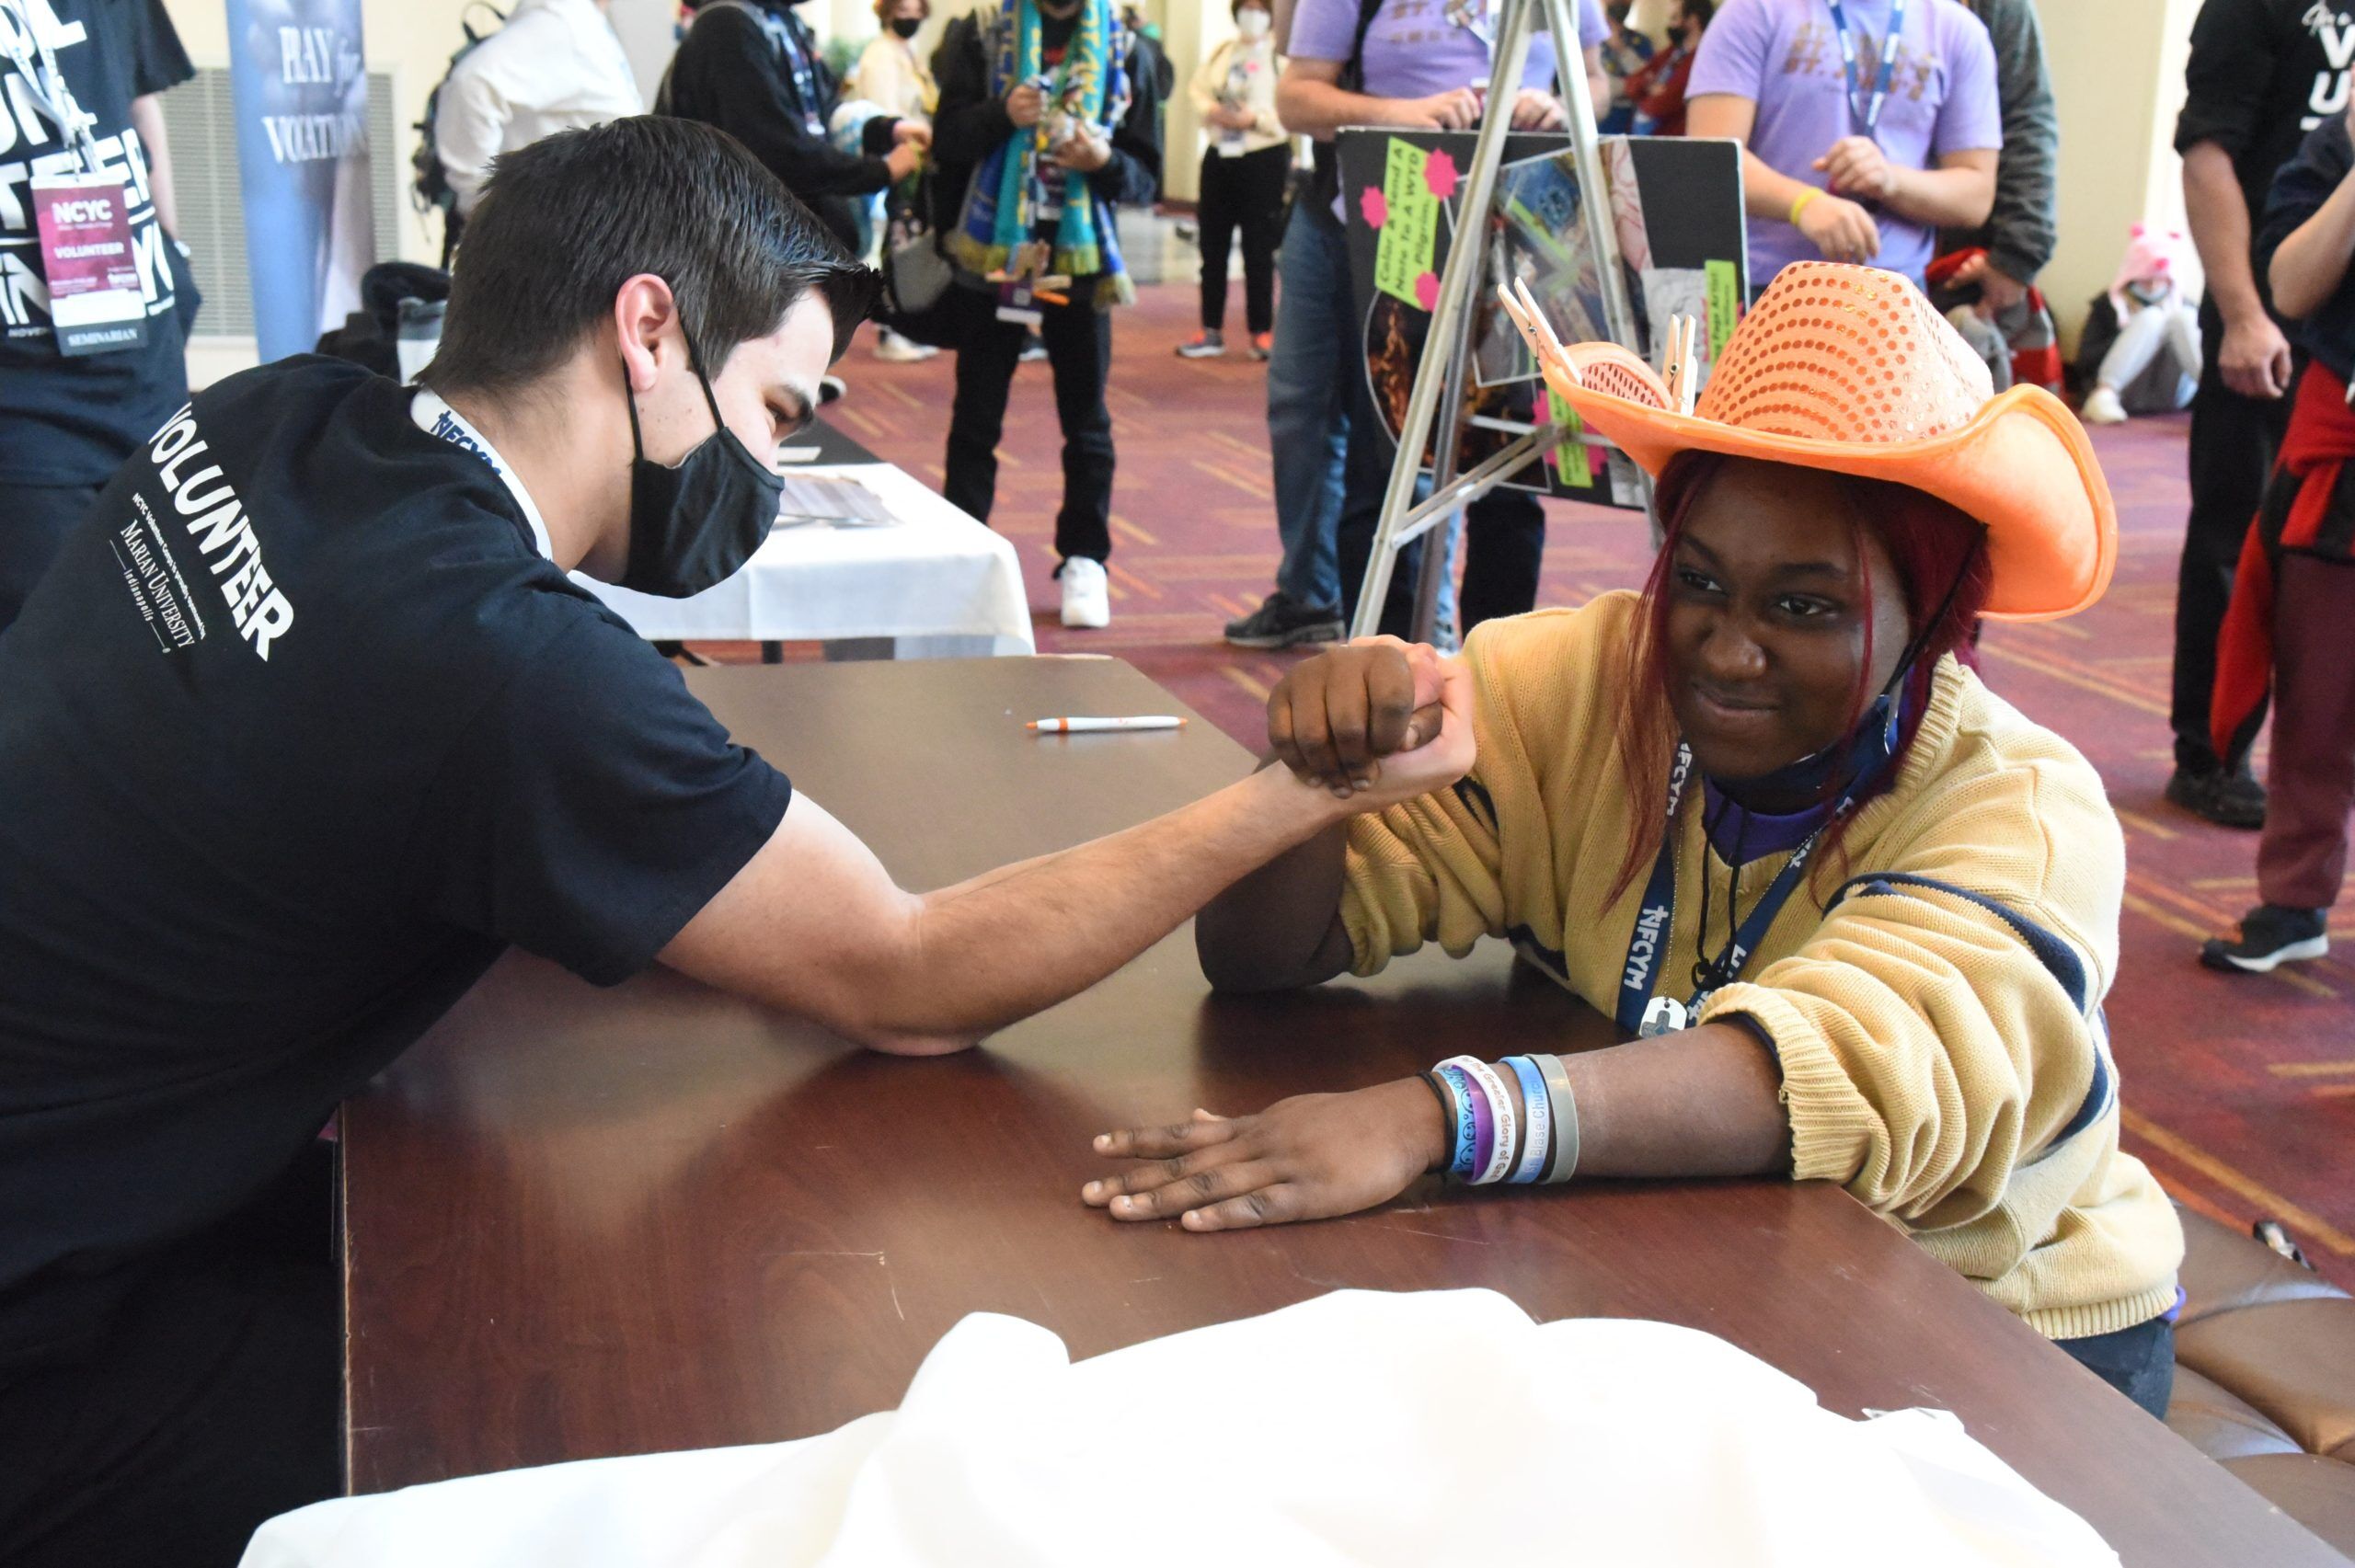 Alex Lindbergh, left, a freshman at Bishop Bruté College Seminary in Indianapolis, arm wrestles Asia Carmon of the Diocese of Raleigh, N.C., at the Indiana Convention Center in Indianapolis Nov. 20, 2021, during the National Catholic Youth Conference. (CNS photo/Sean Gallagher, The Criterion)